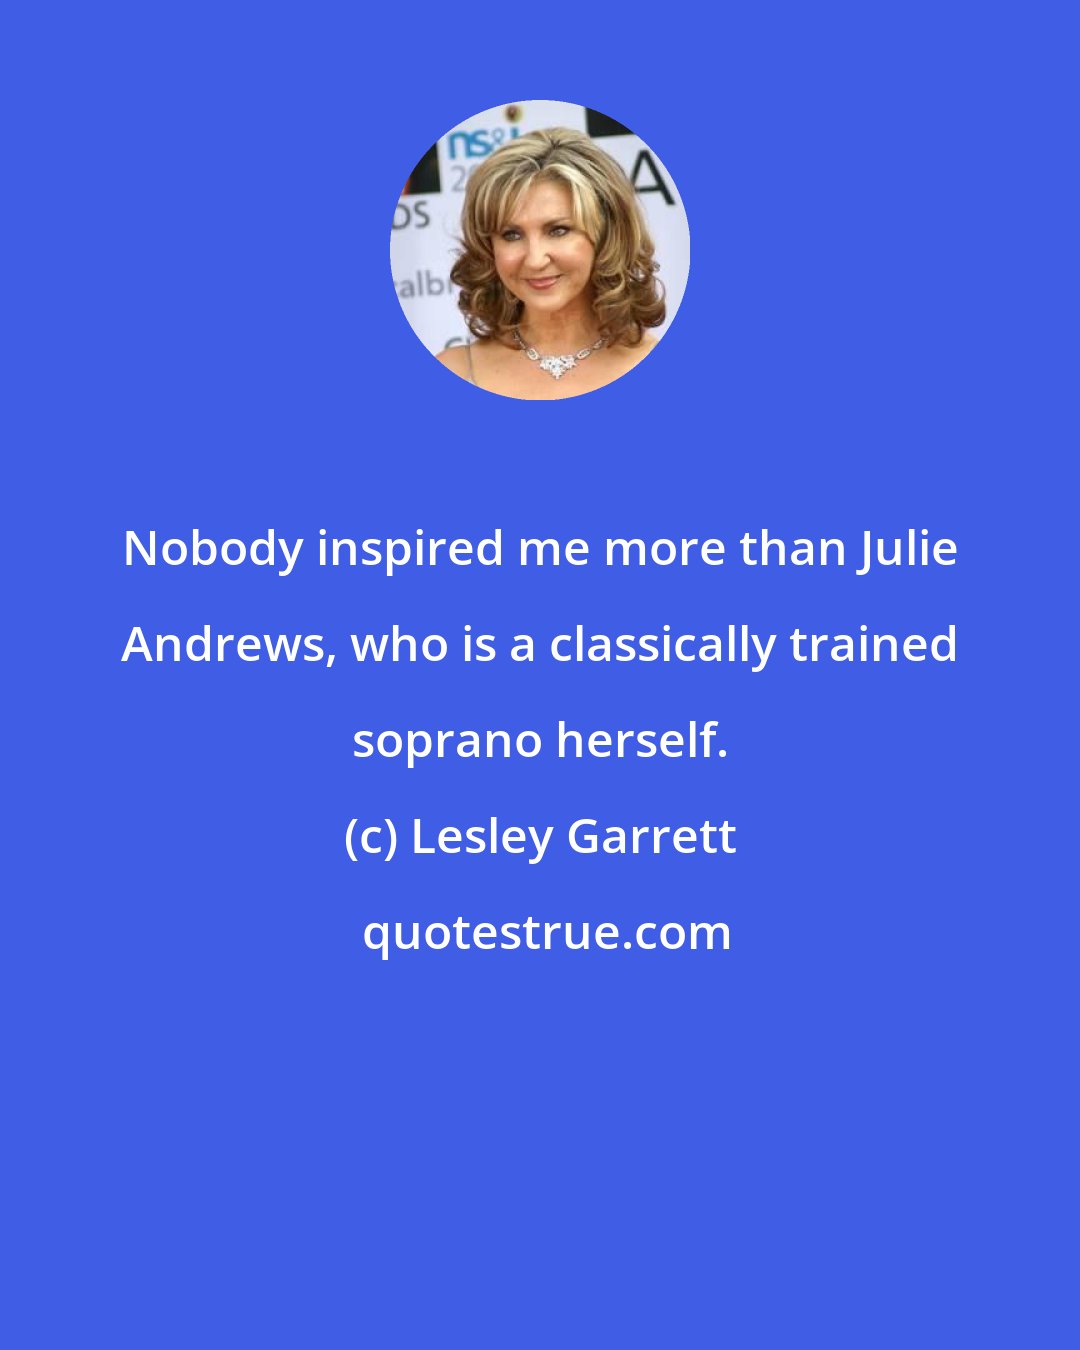 Lesley Garrett: Nobody inspired me more than Julie Andrews, who is a classically trained soprano herself.